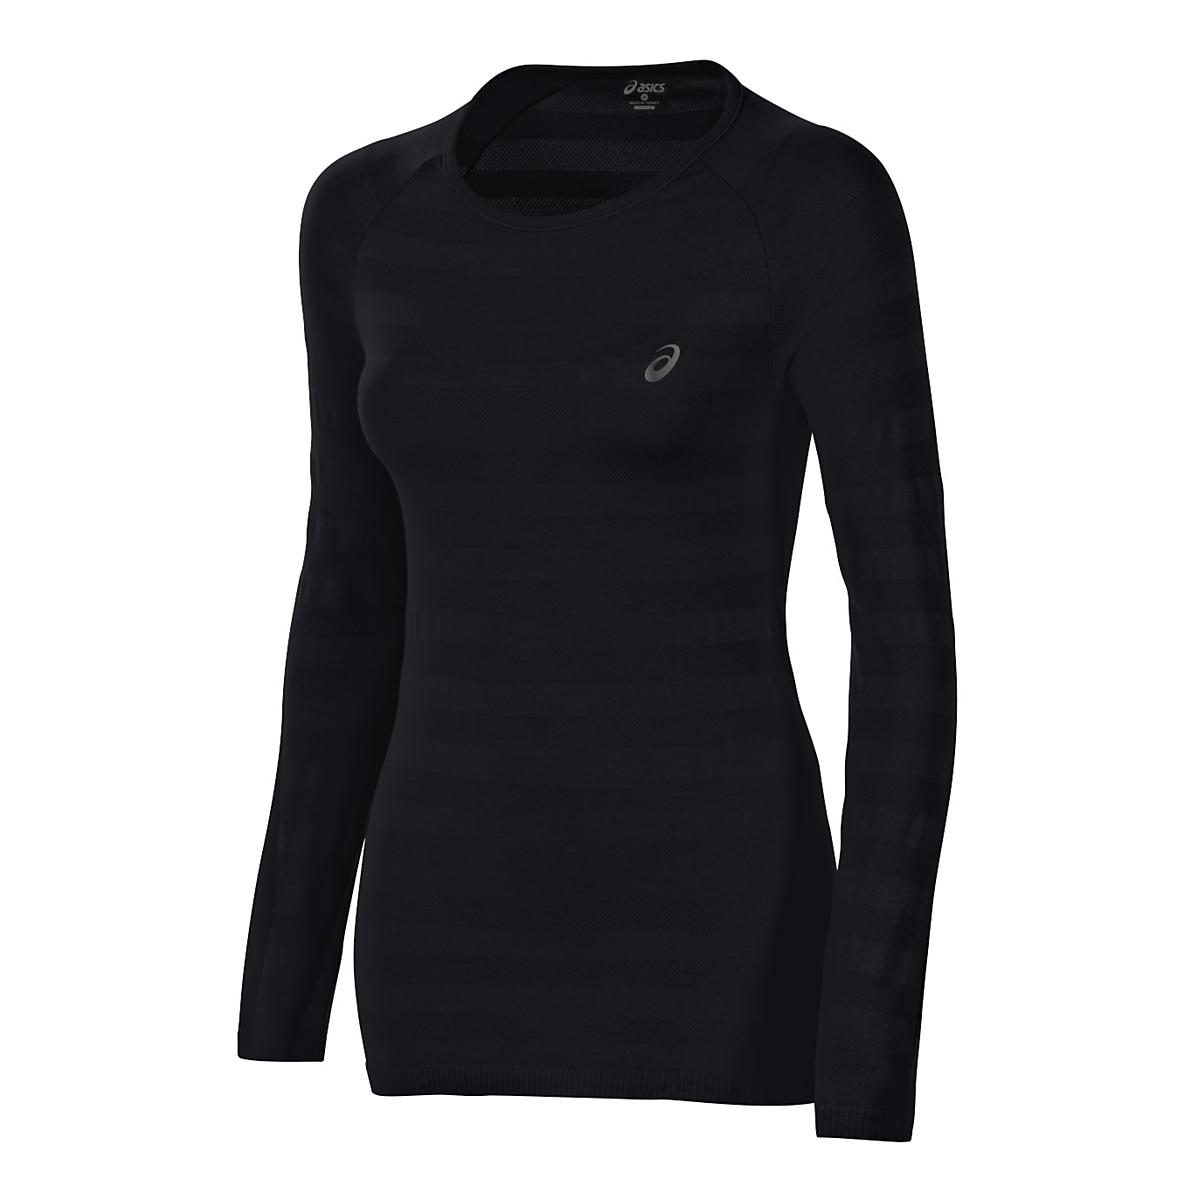 Womens Nike Seamless Short Sleeve Technical Tops at Road Runner Sports